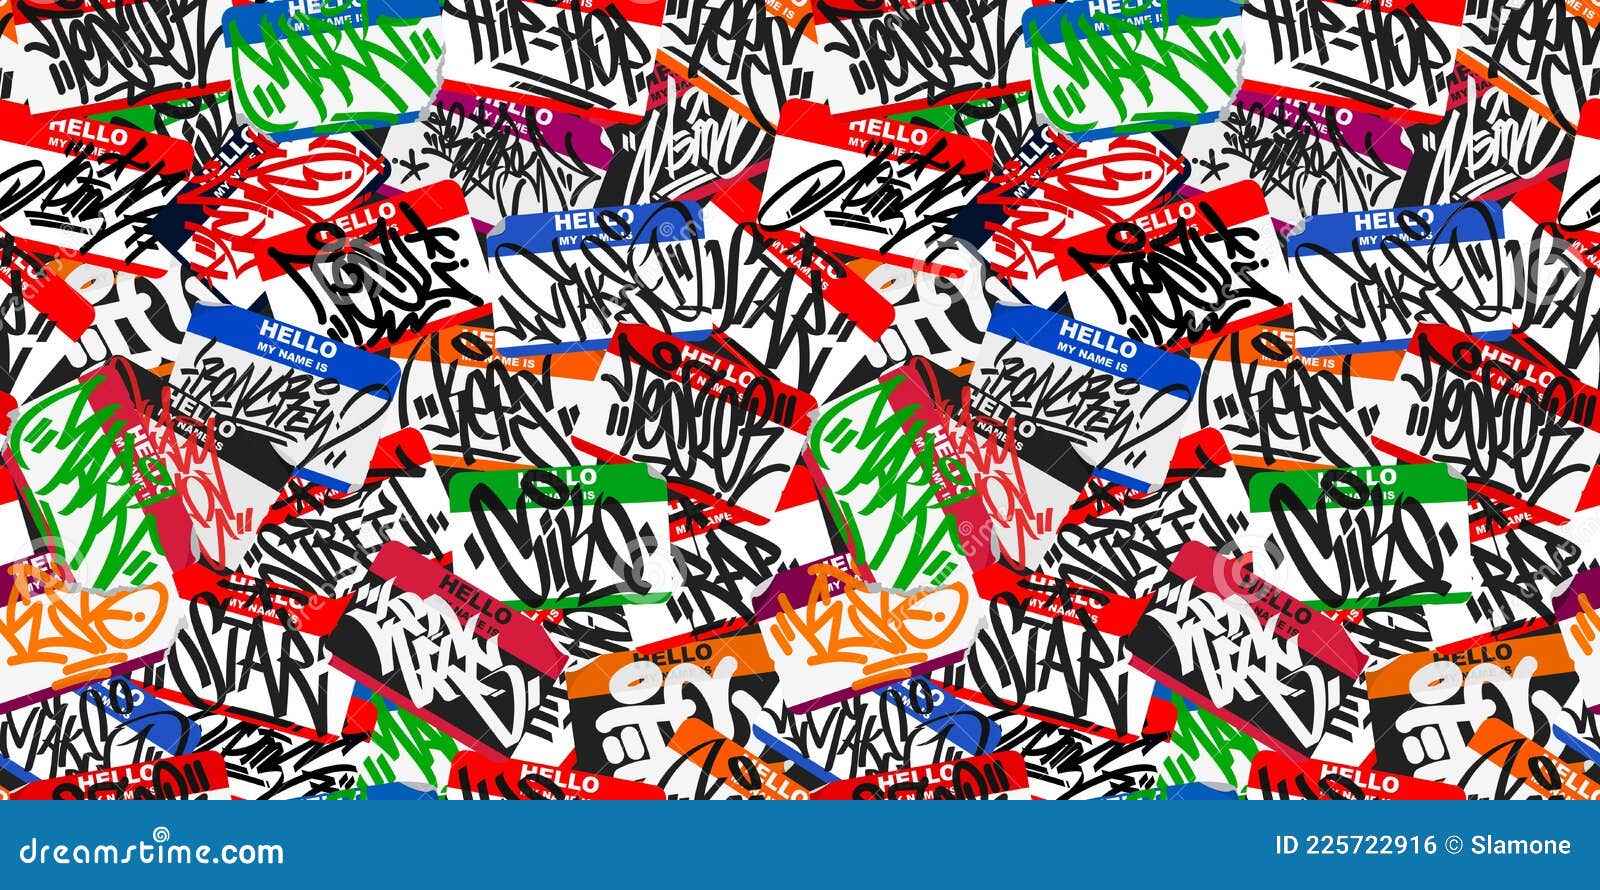 Seamless Colorful Abstract Urban Graffiti Style Sticker Bombing Hello My  Name is with Some Street Art Lettering Vector Stock Vector - Illustration  of drawing, fashion: 225722916